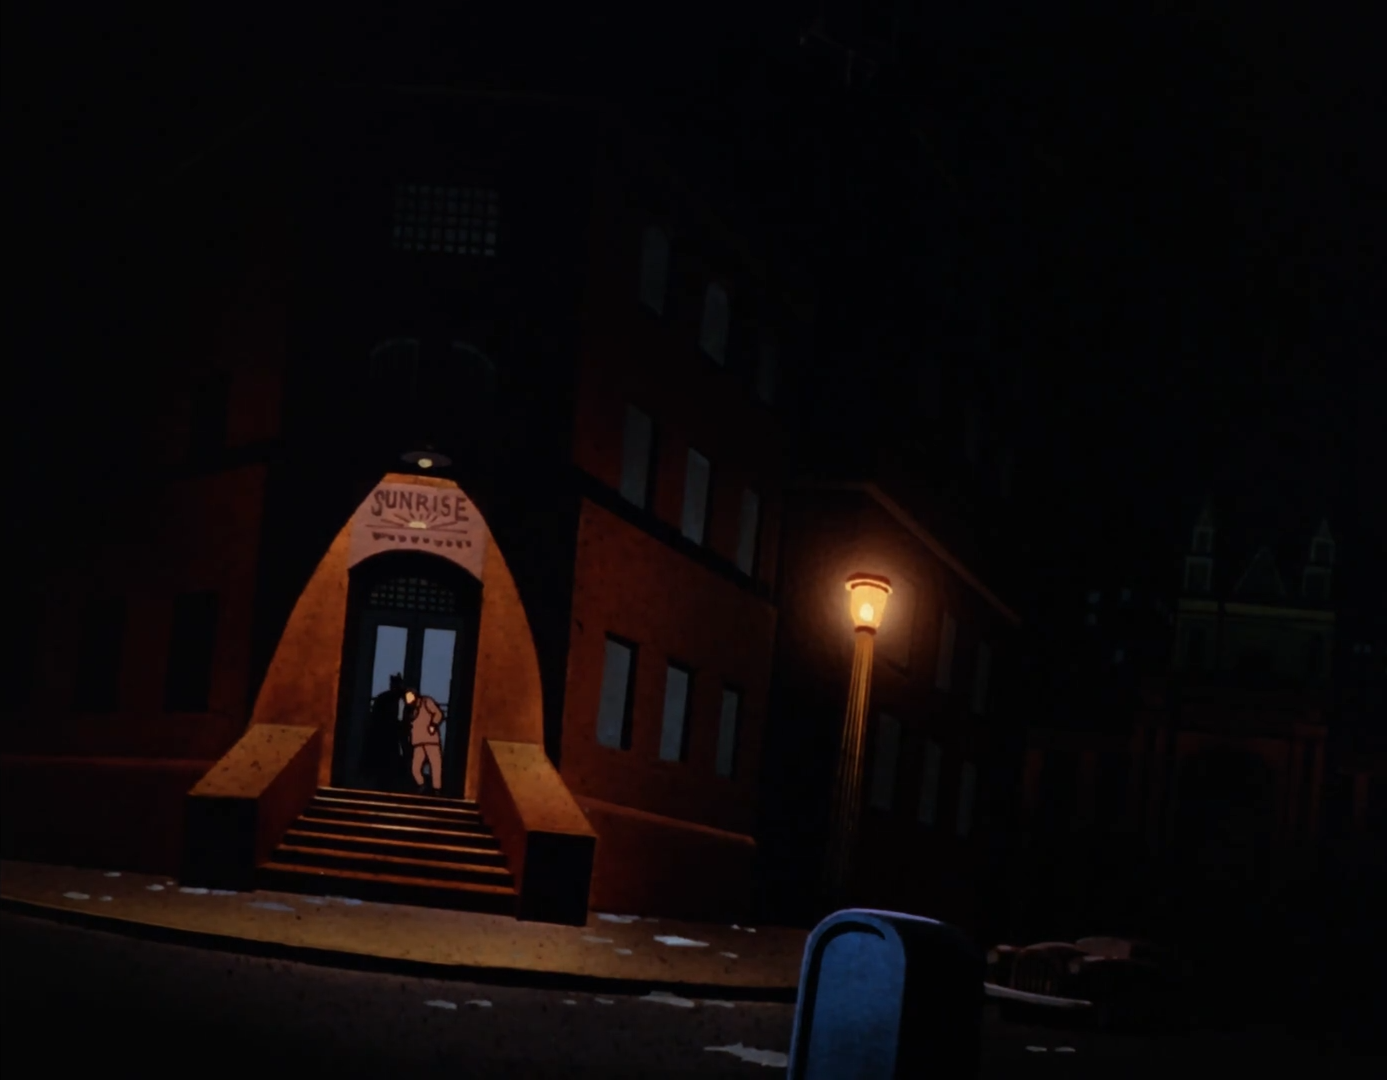 A frame from Batman: The Animated Series